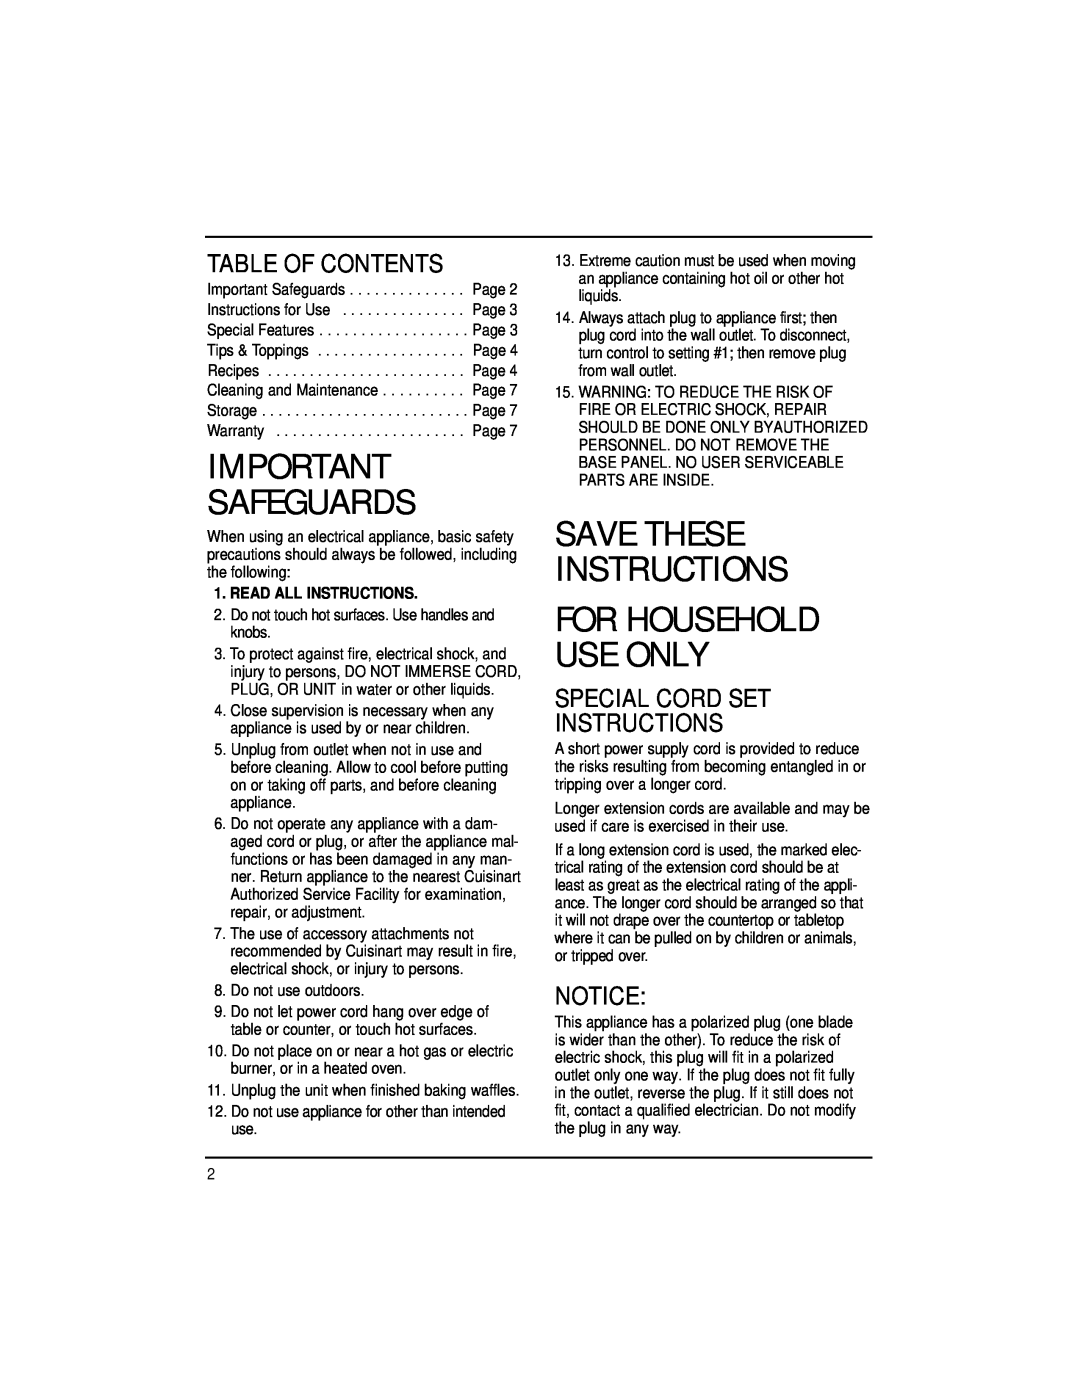 Cuisinart WMB-4A manual Table Of Contents, Special Cord Set Instructions, Safeguards, Save These Instructions 